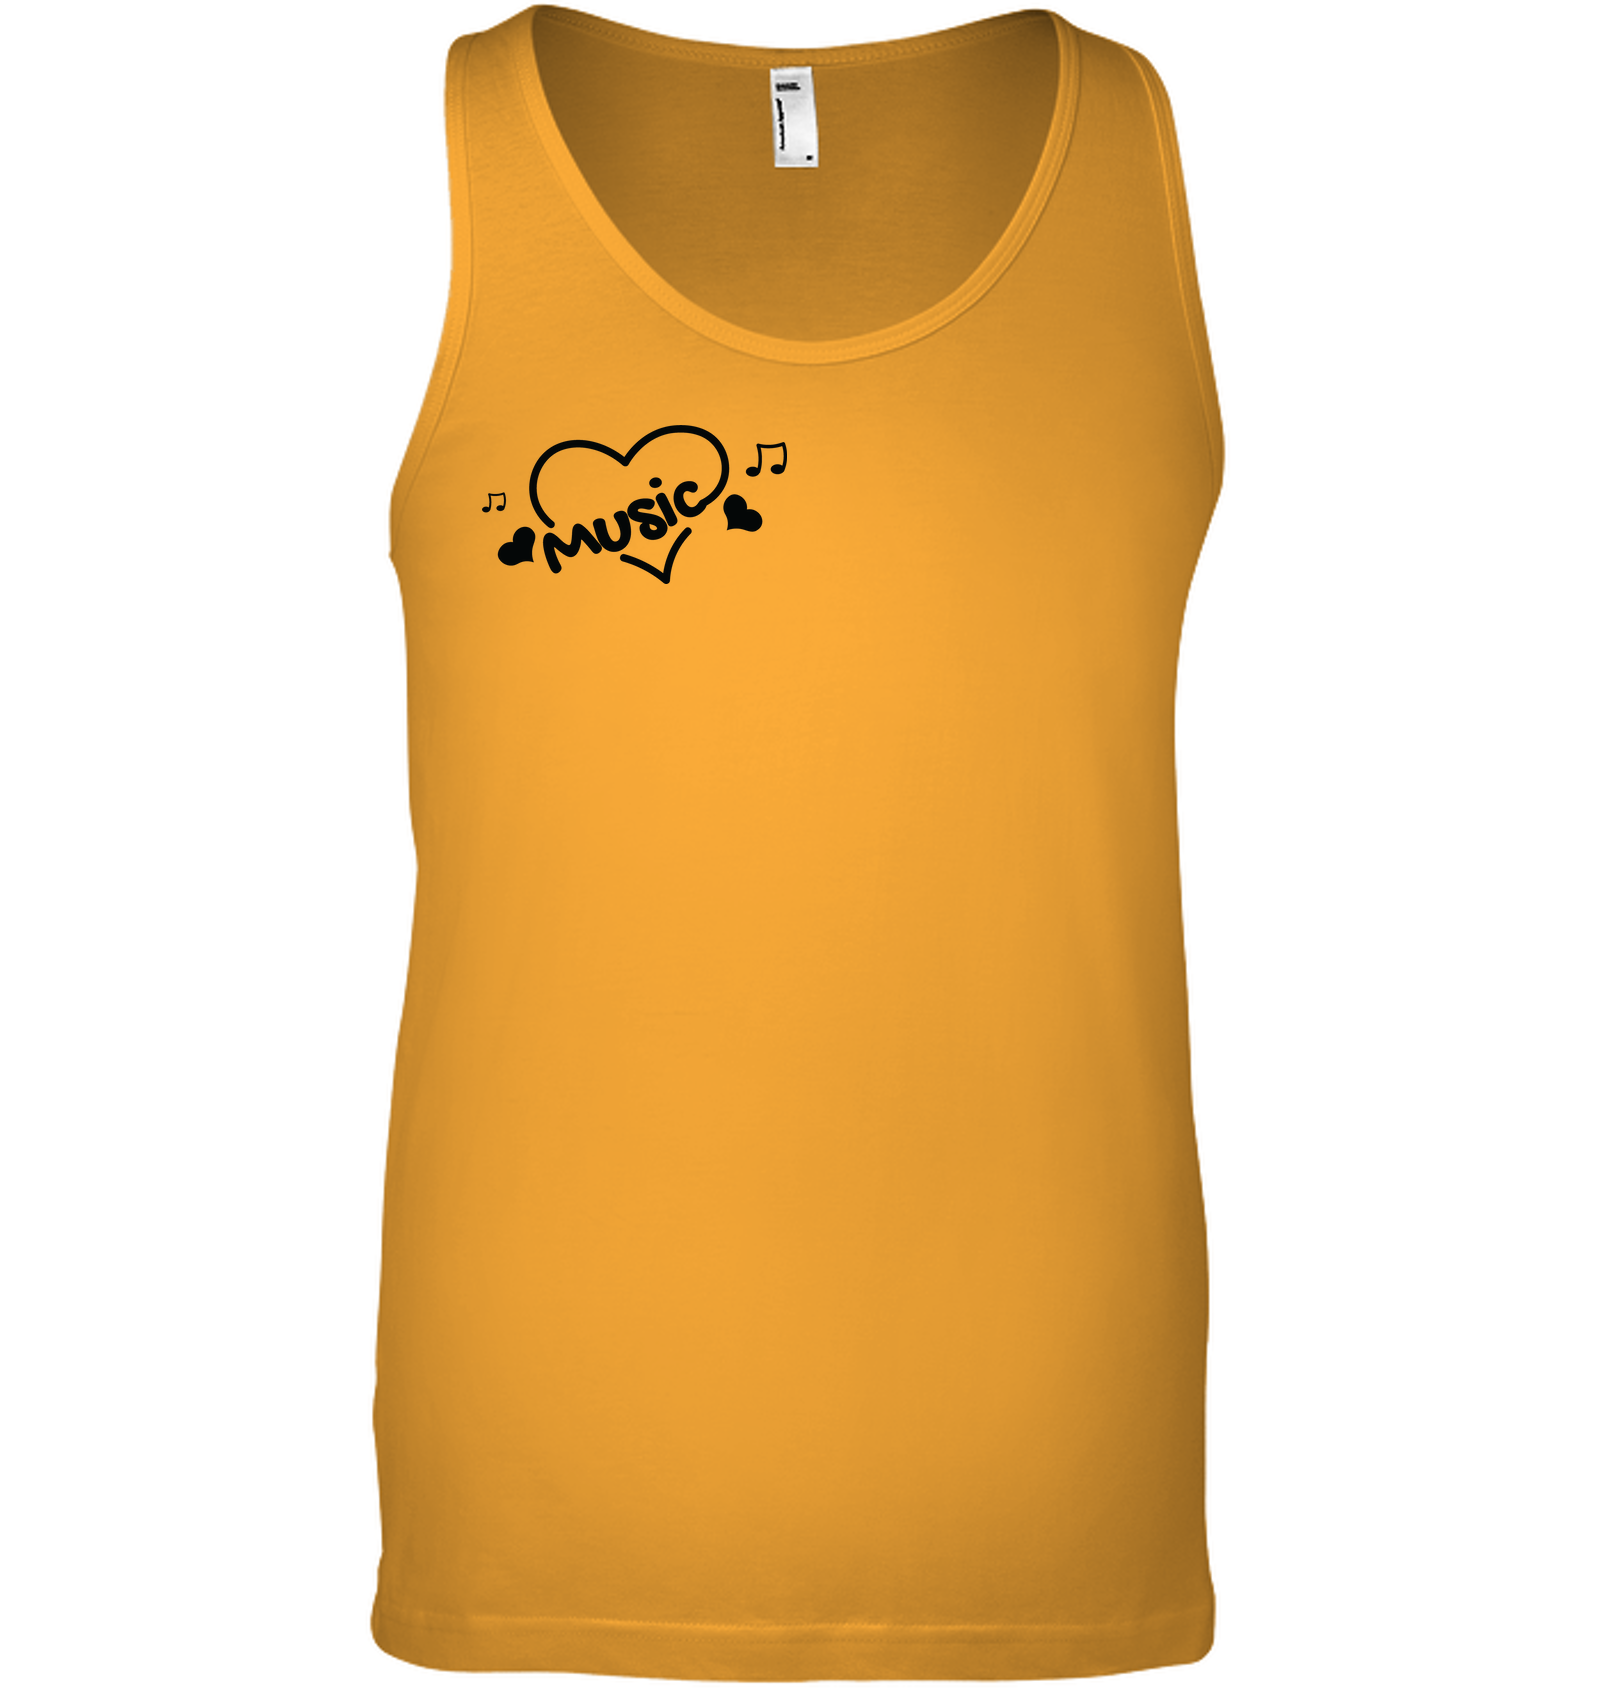 Music Hearts and Notes (Pocket Size) - Bella + Canvas Unisex Jersey Tank